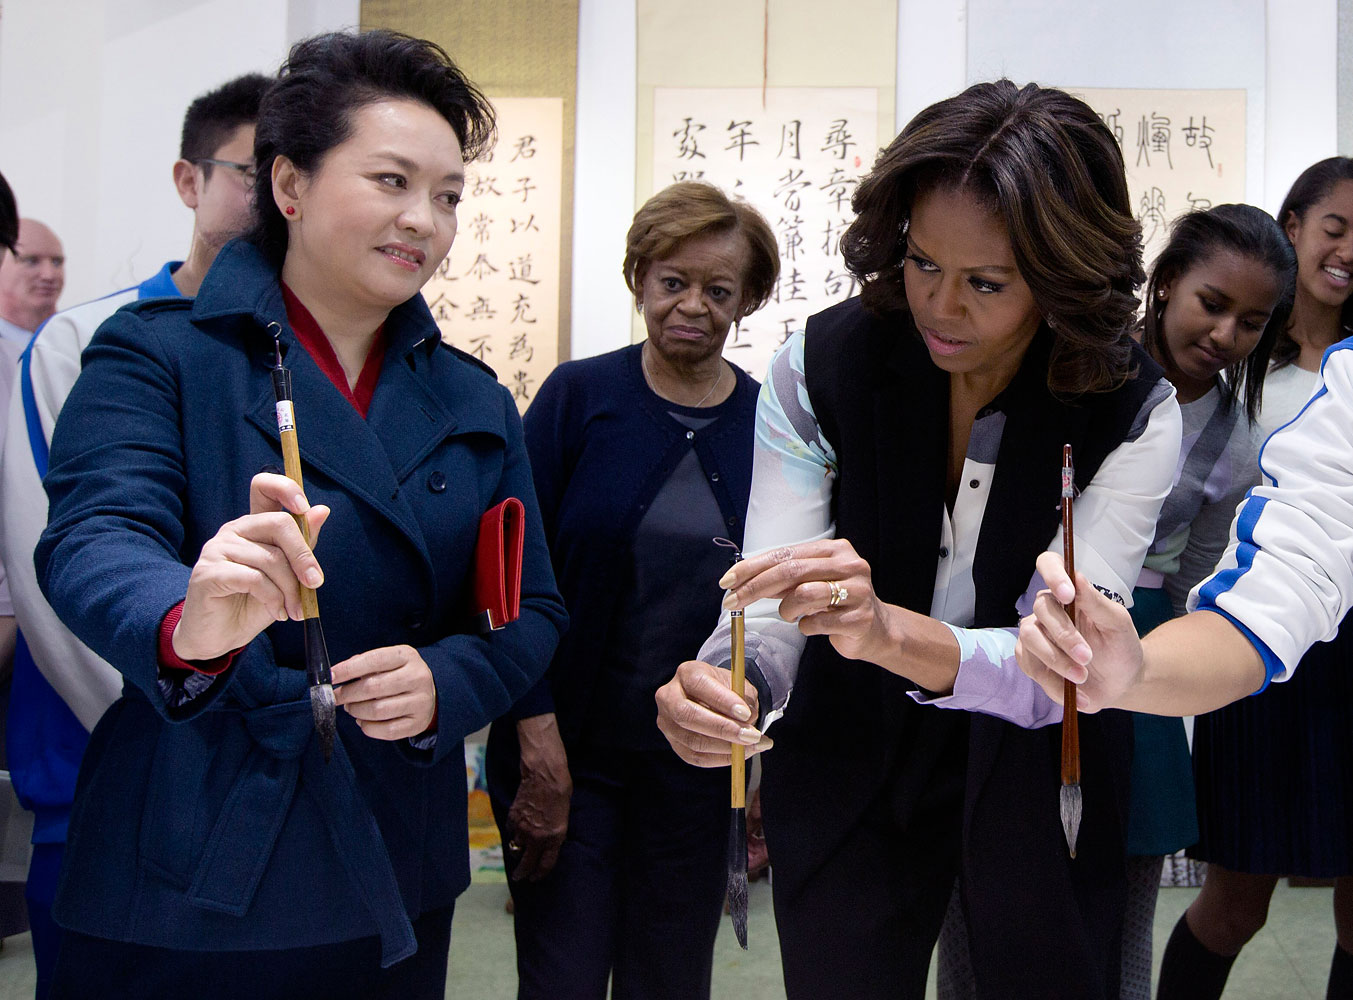 Peng Liyuan, wife of Chinese President Xi Jinping shows U.S. first lady Michelle Obama how to hold a writing brush as they visit a Chinese traditional calligraphy class at the Beijing Normal School, a school that prepares students to go abroad in Beijing, March 21, 2014.